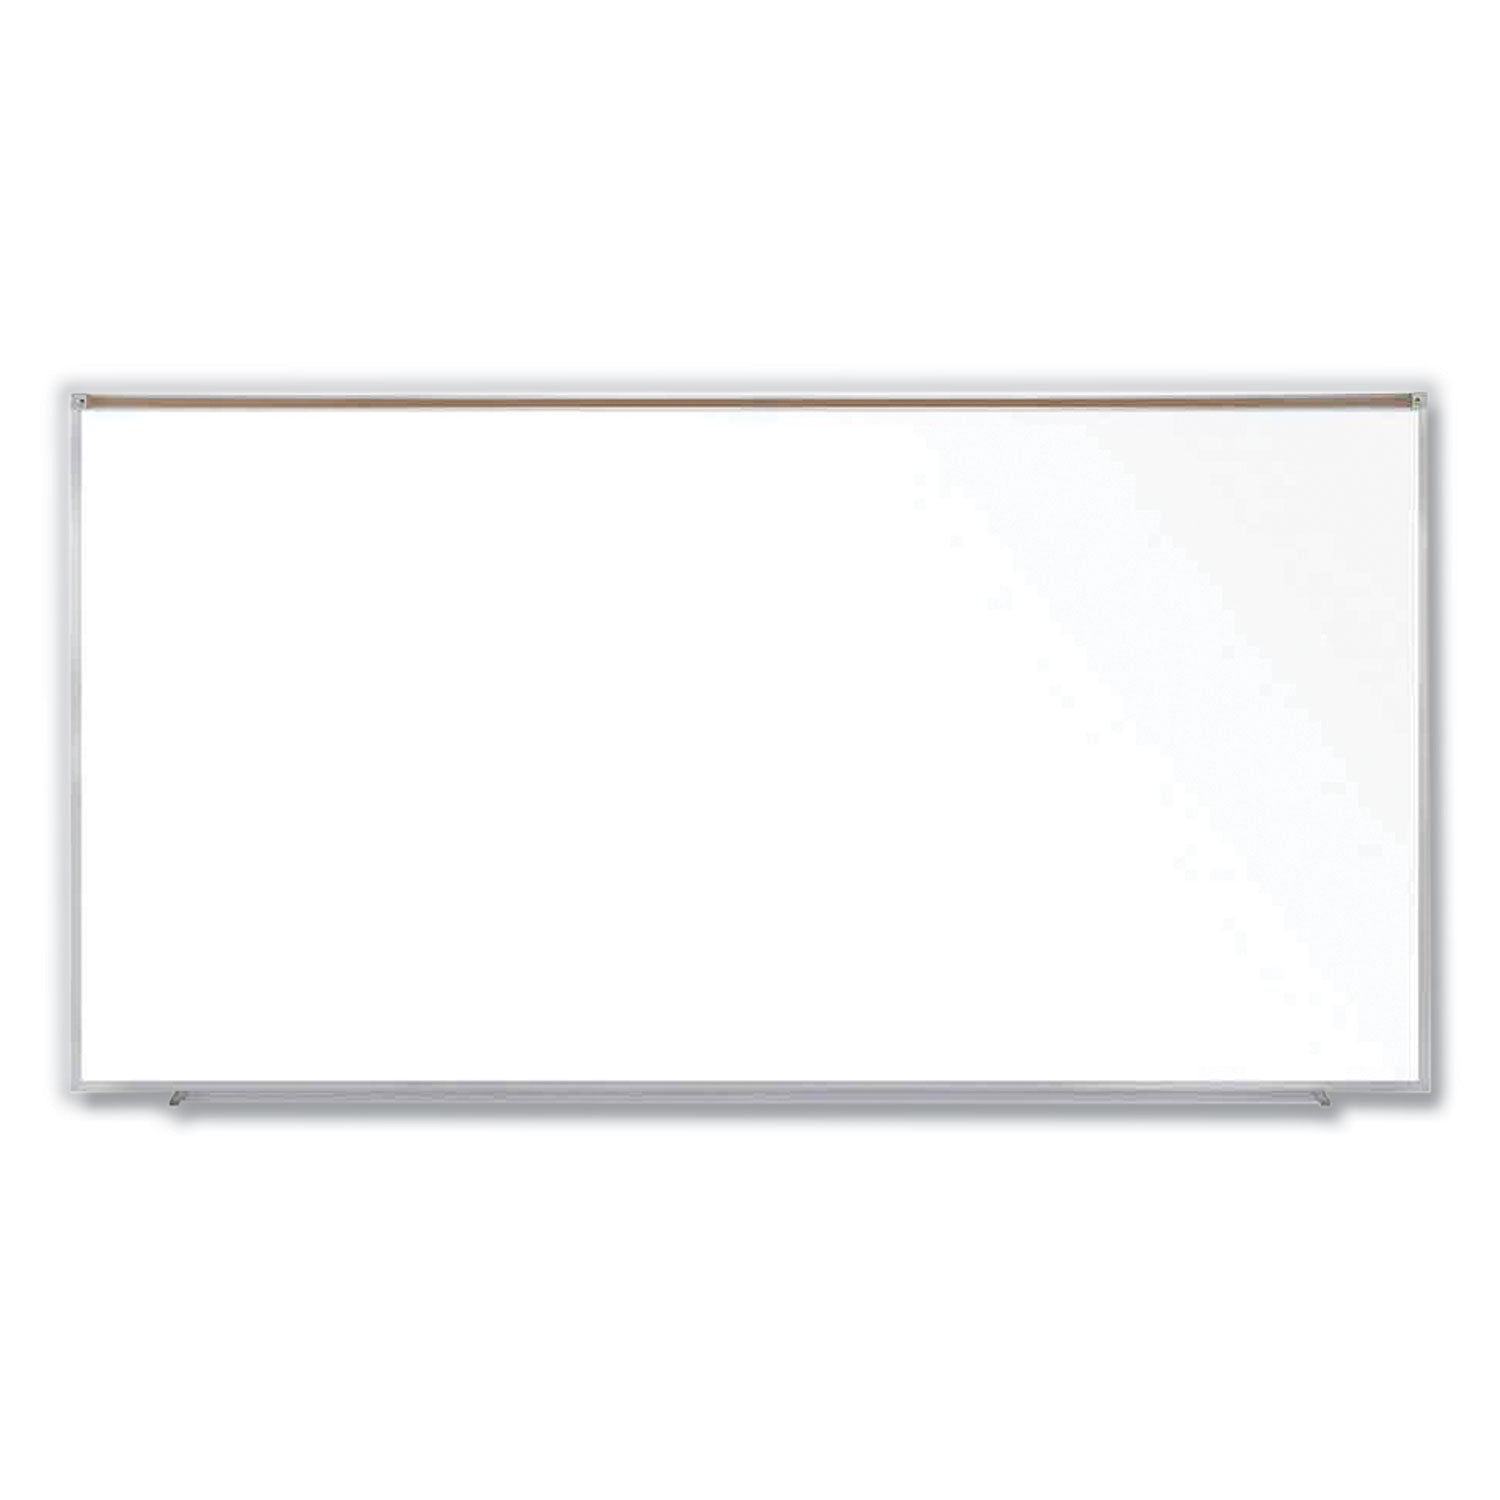 magnetic-porcelain-whiteboard-with-satin-aluminum-frame-and-map-rail-12059-x-6047-white-surface-ships-in-7-10-bus-days_ghem1p5101m - 1